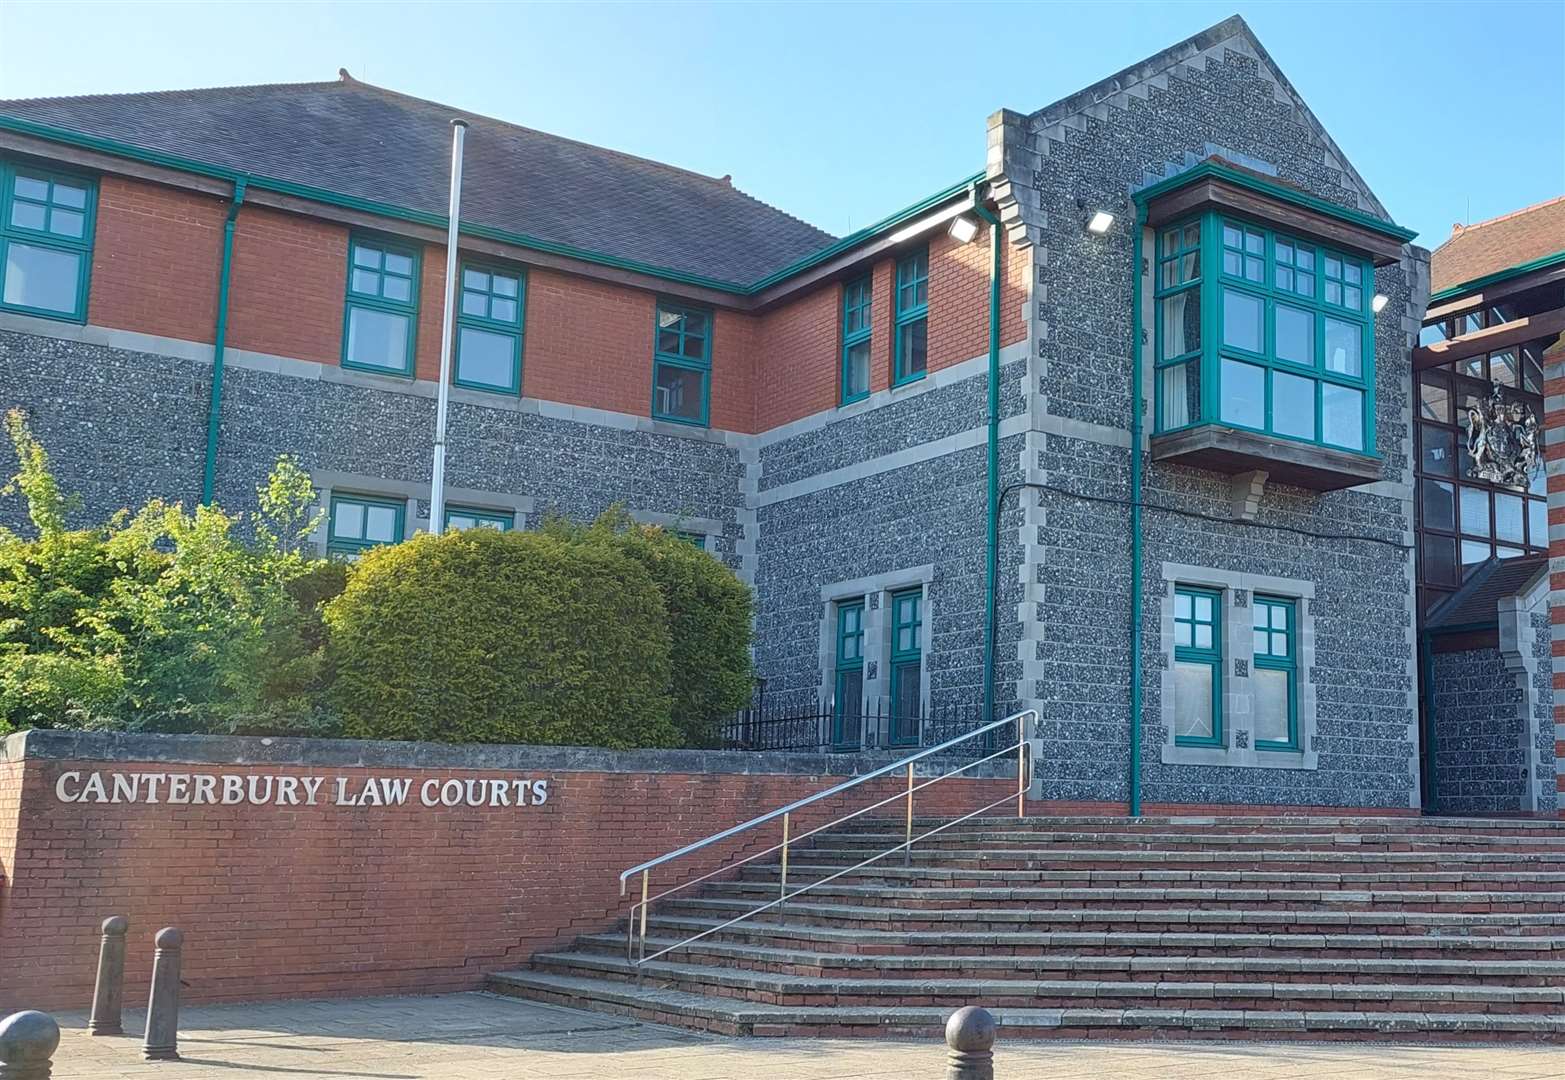 He was sentenced at Canterbury Crown Court on Friday